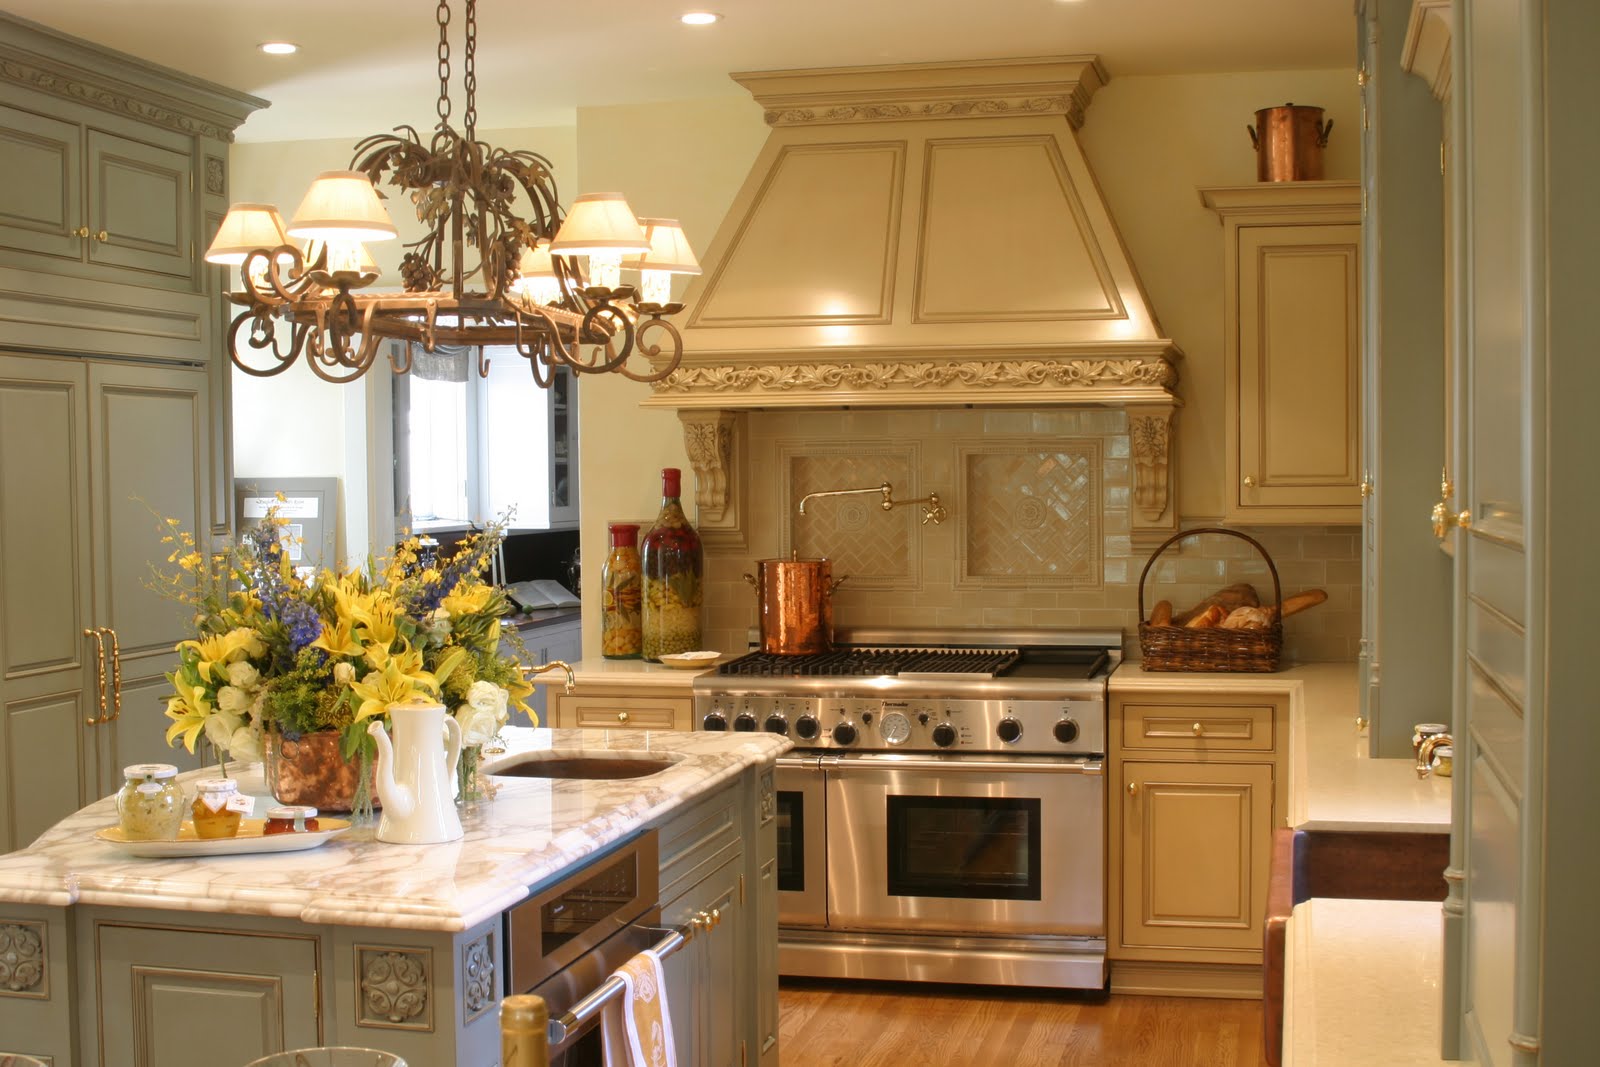 How much does a small kitchen remodel cost - large and beautiful photos